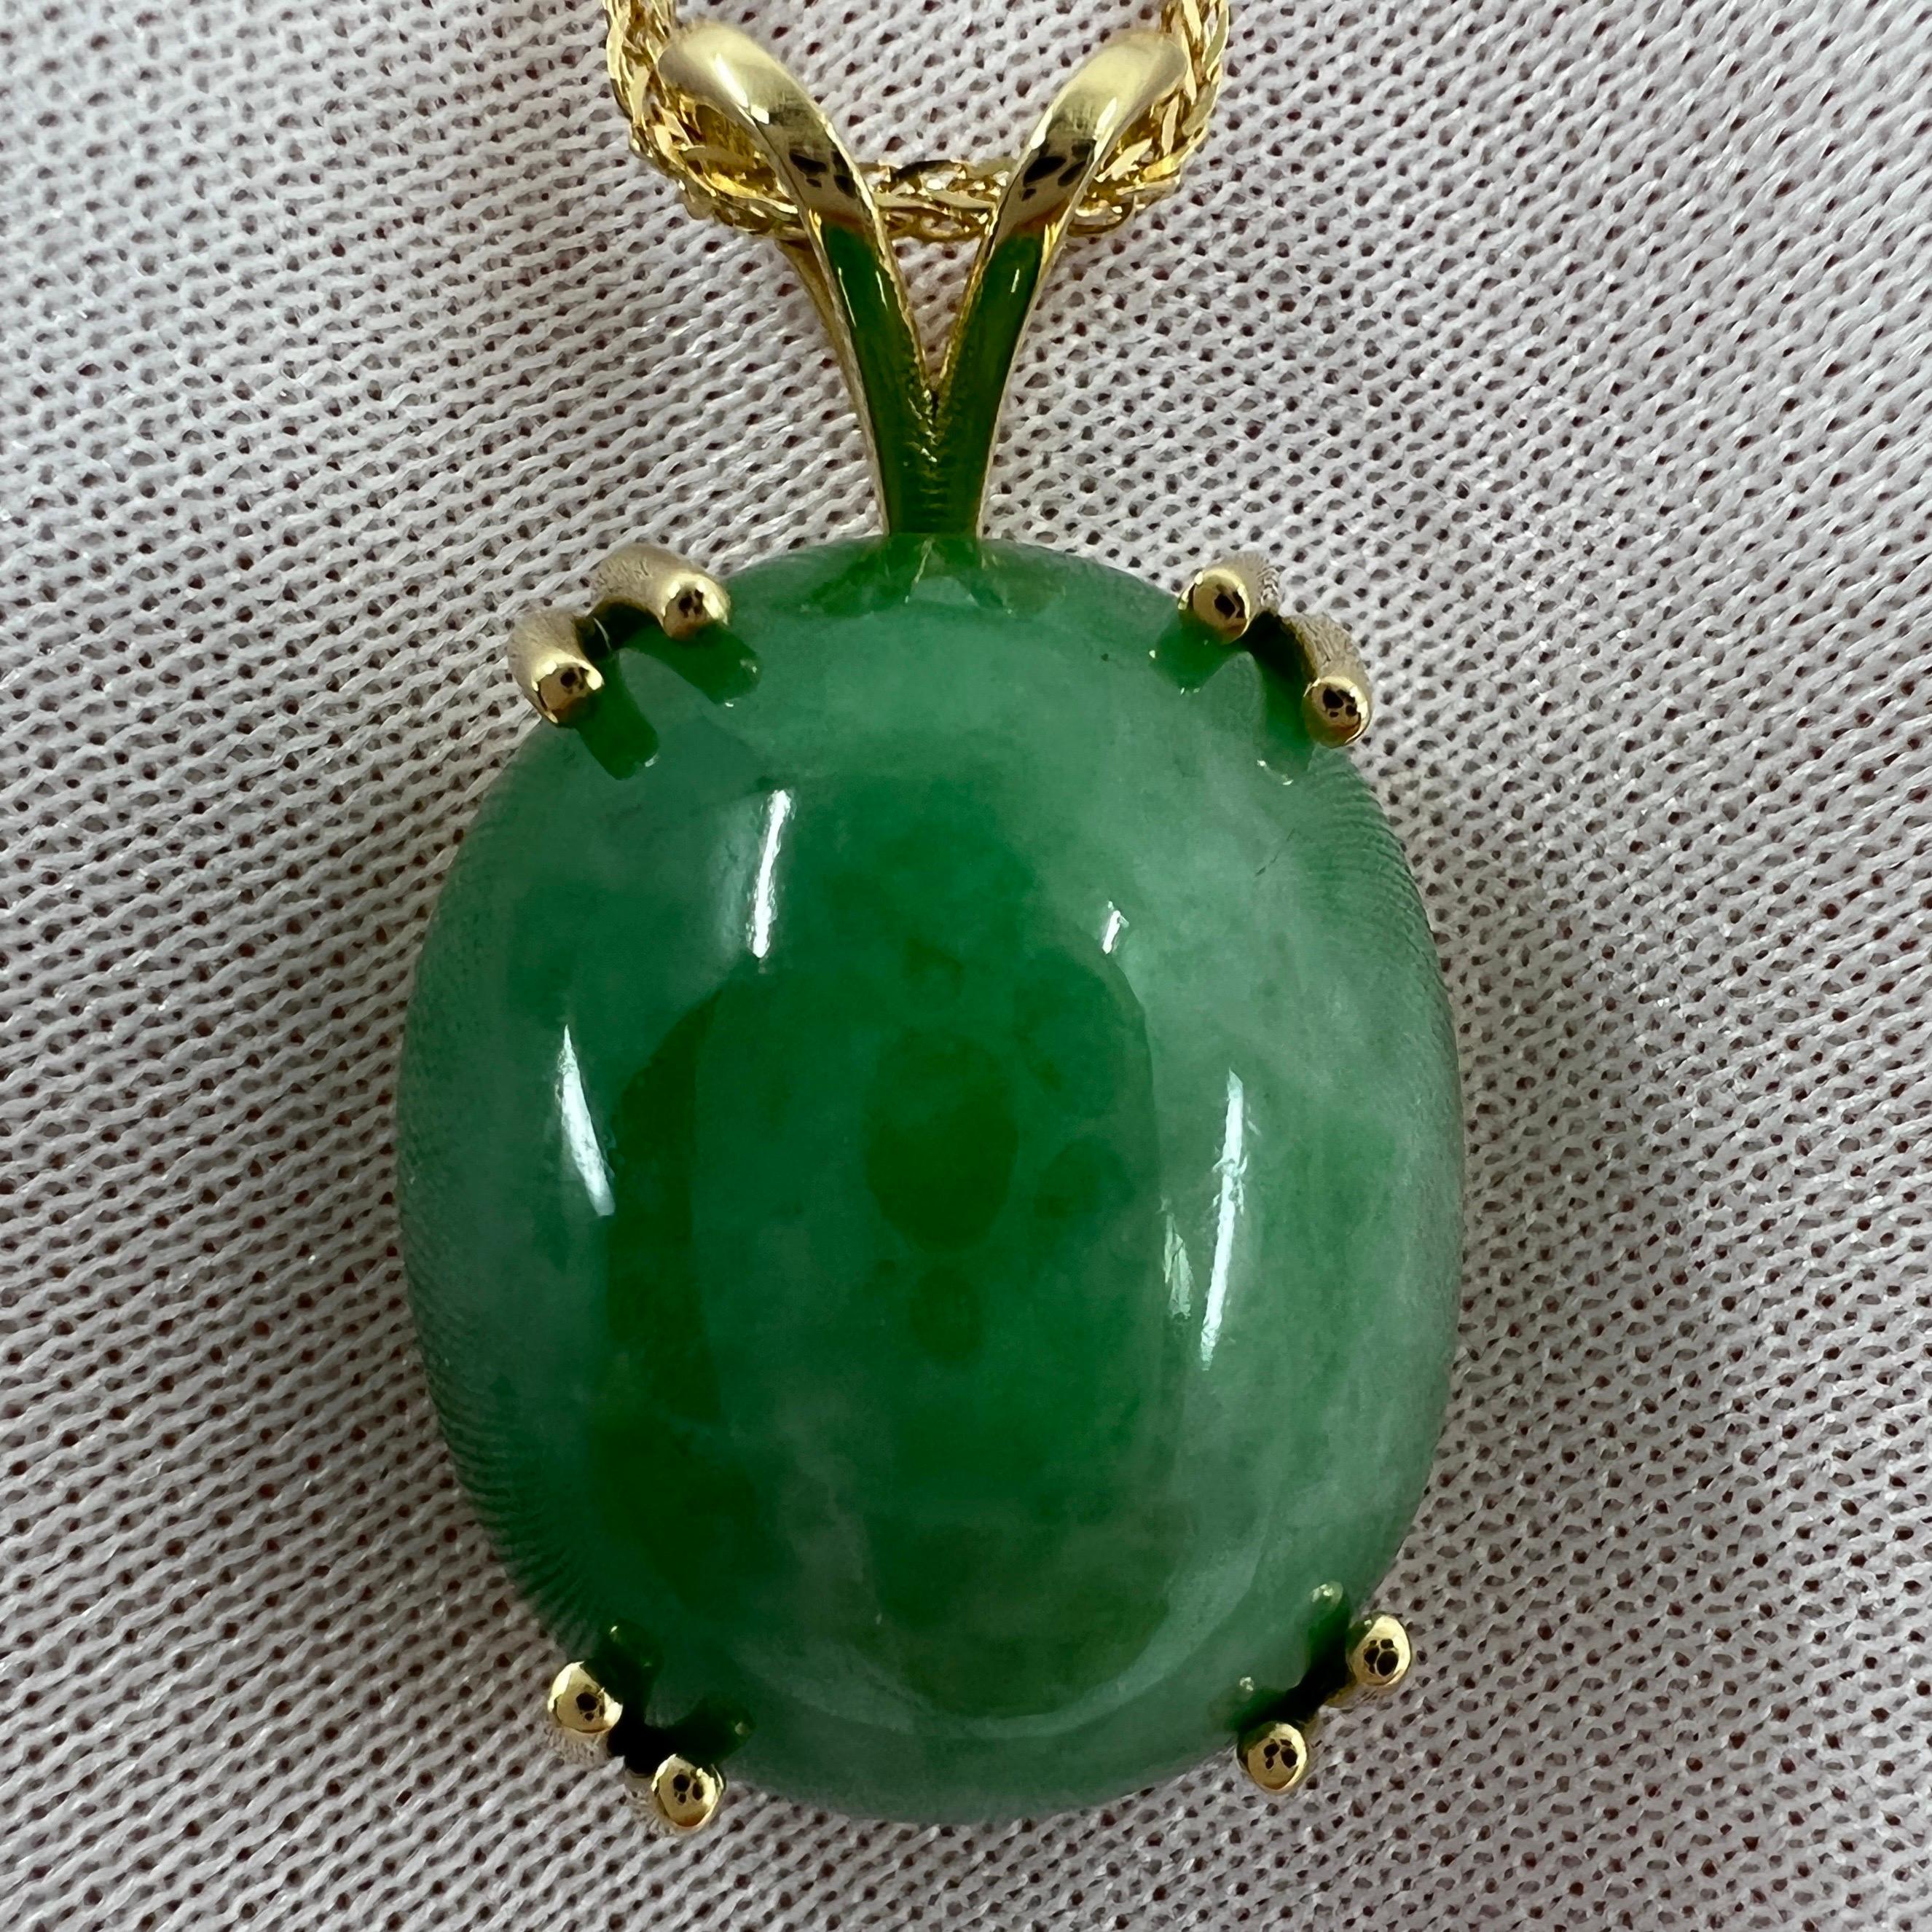 35.69ct GIA Certified Untreated Jadeite Jade A Grade 18k Yellow Gold Pendant For Sale 2